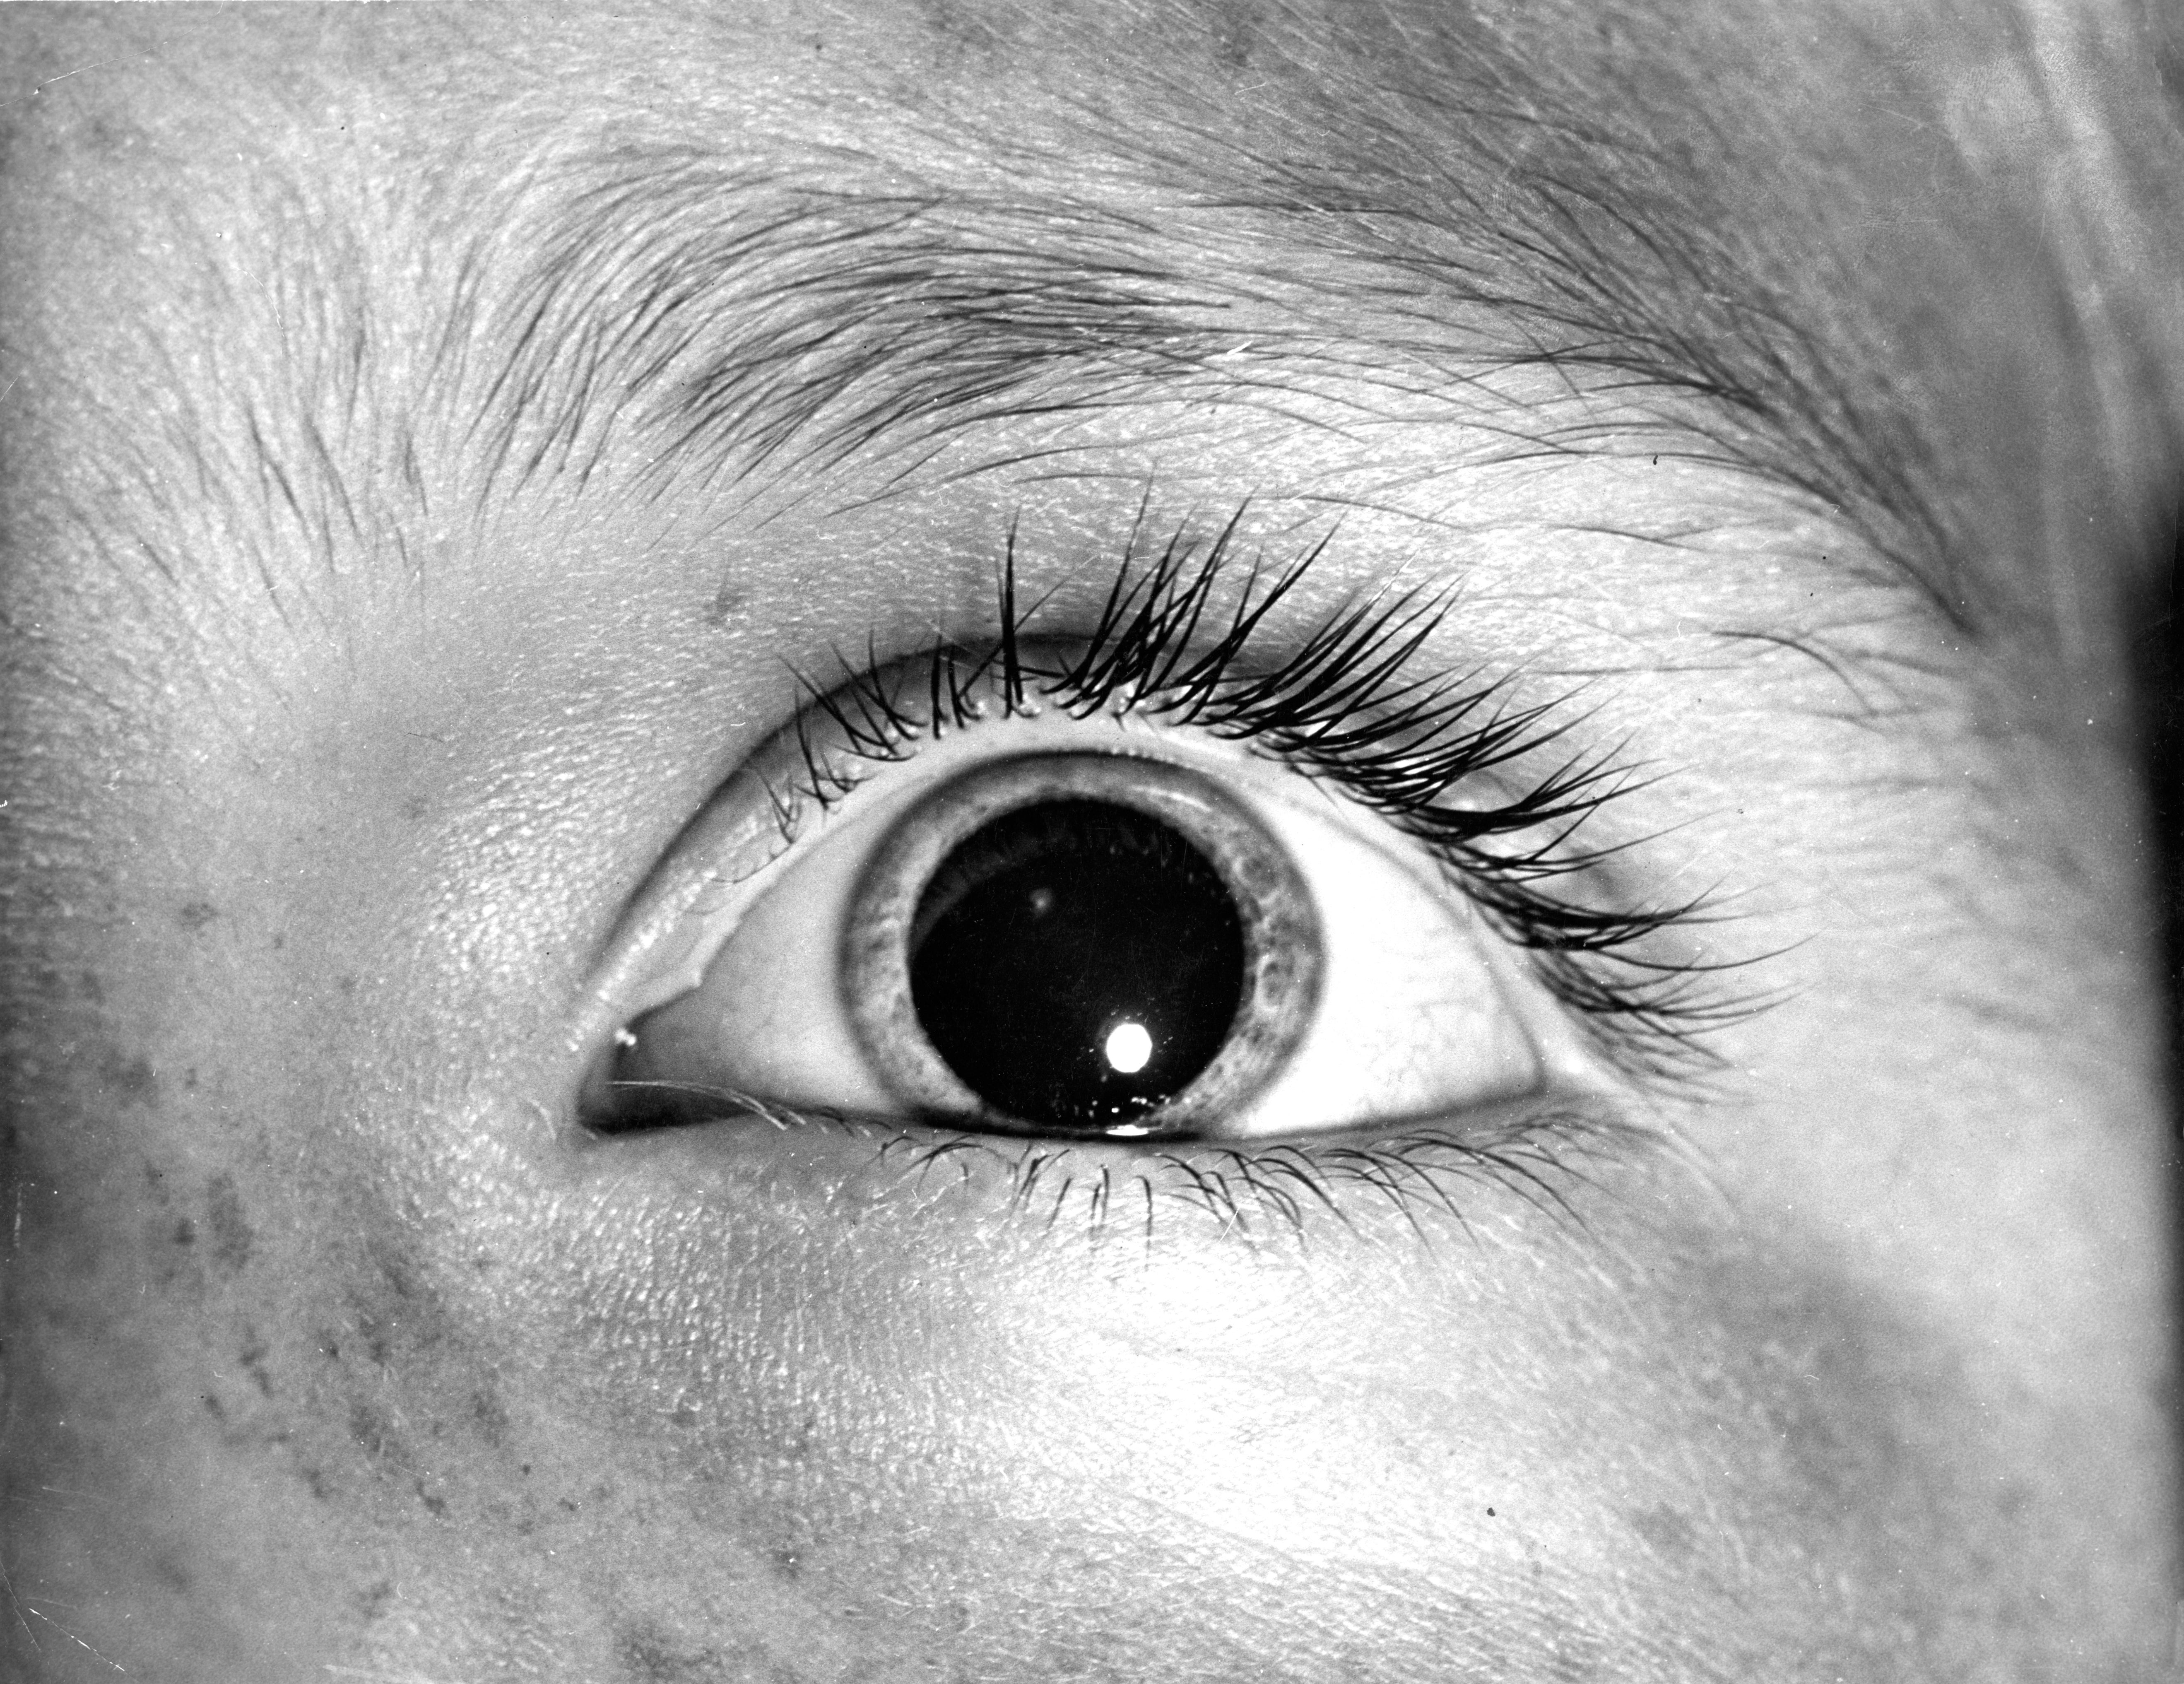 dilated pupils attraction women